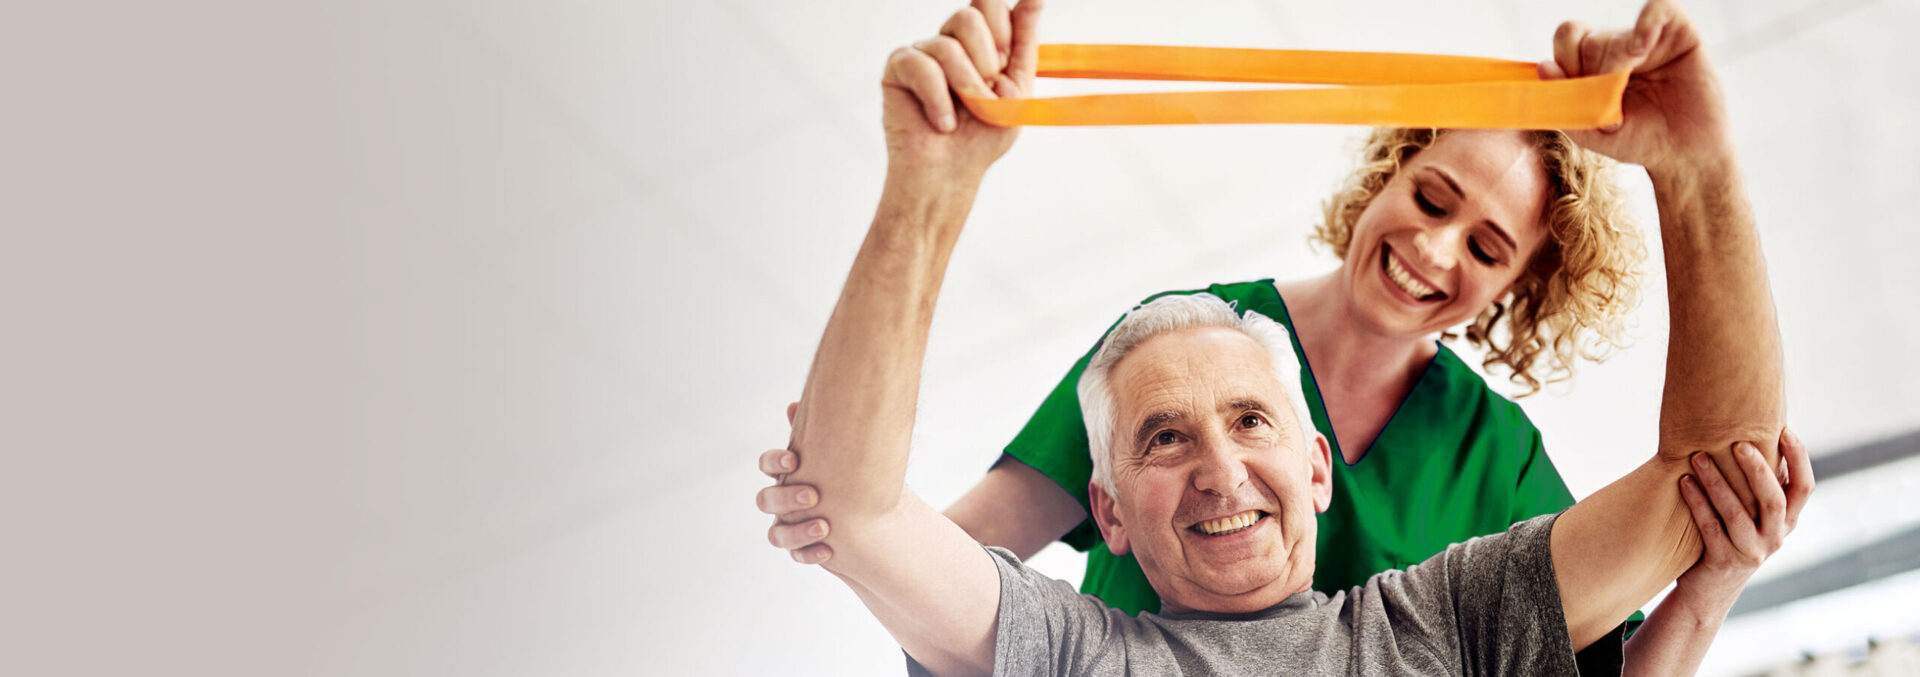 young female therapist helping an elderly male patient stretch a resistance band above his head